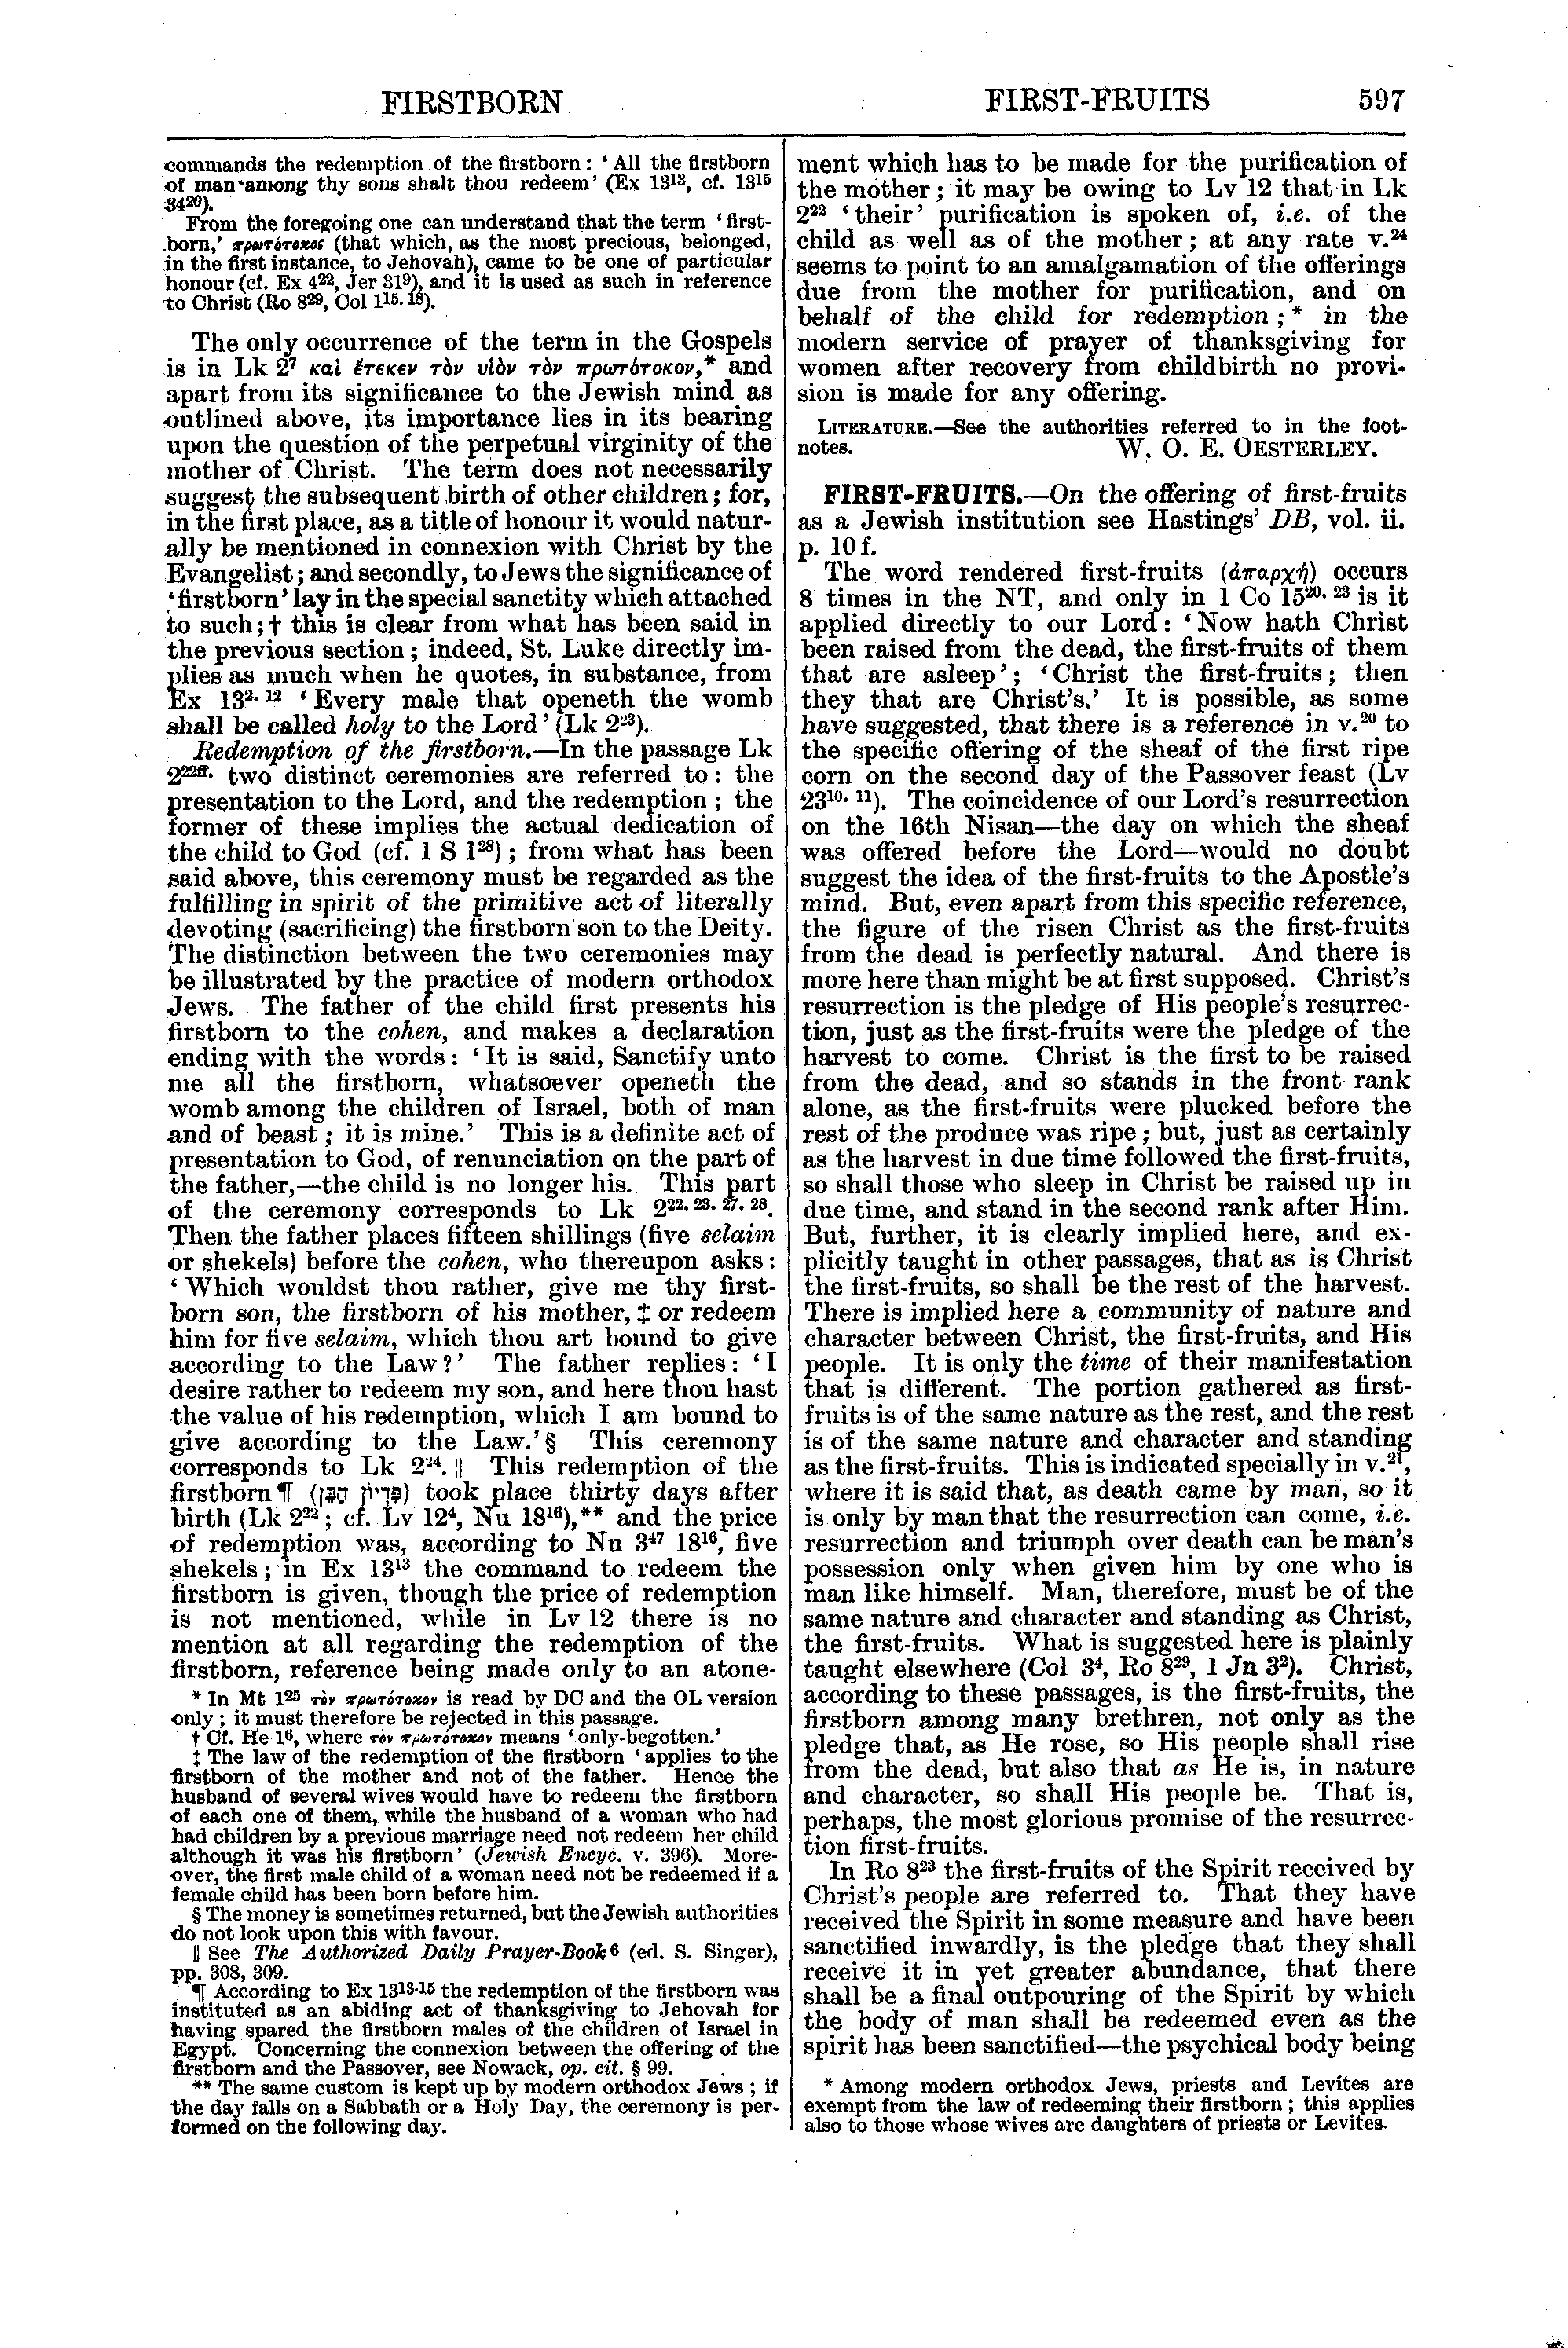 Image of page 597